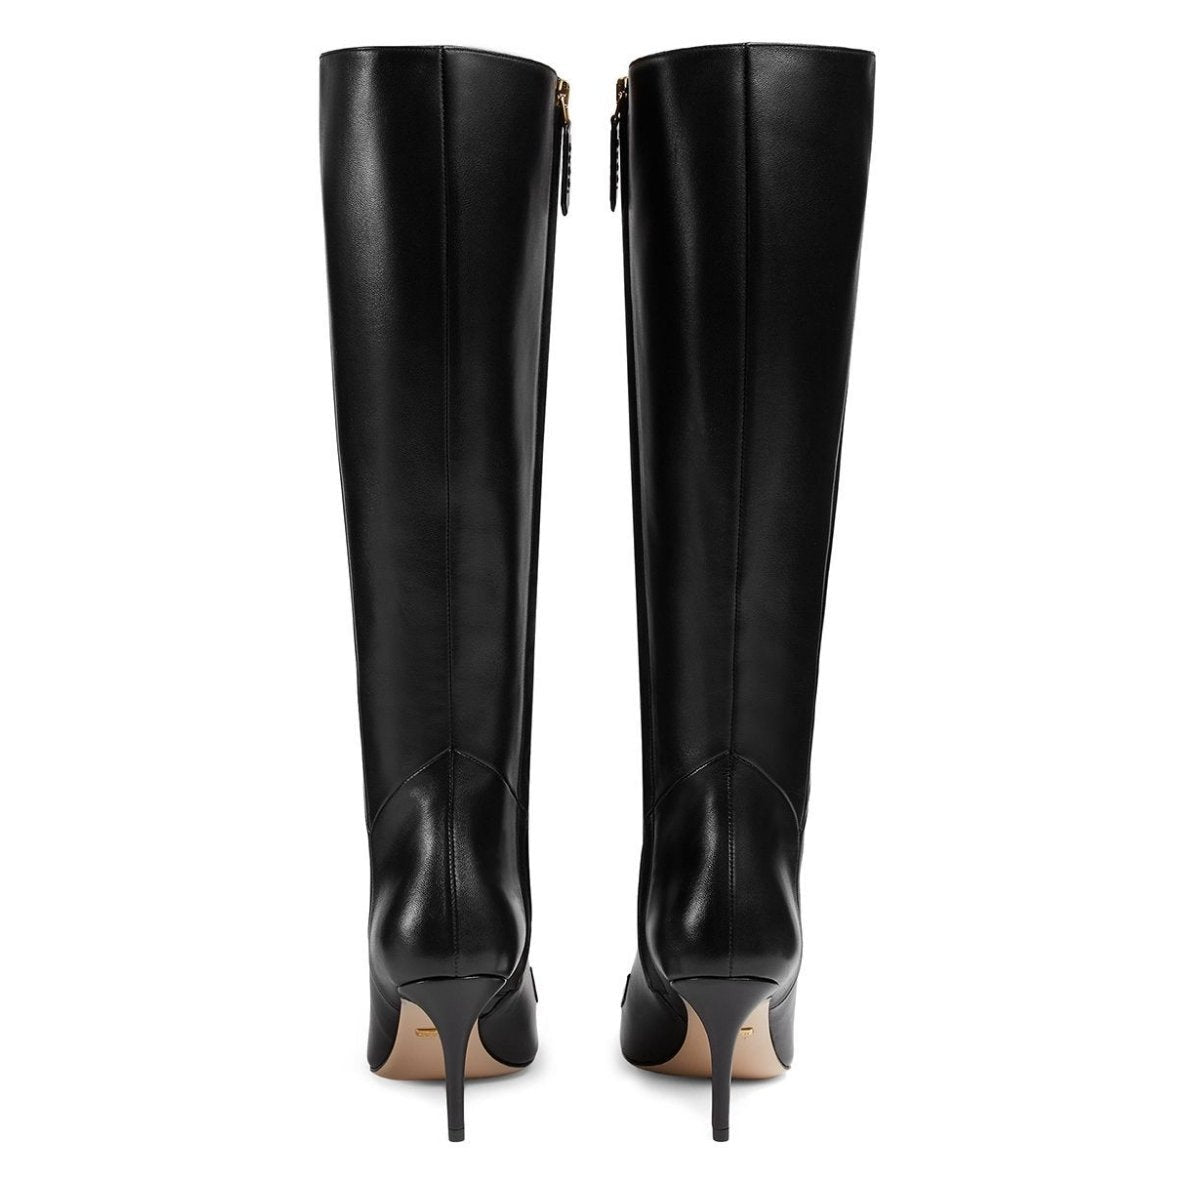 Zumi Black Leather High Boots